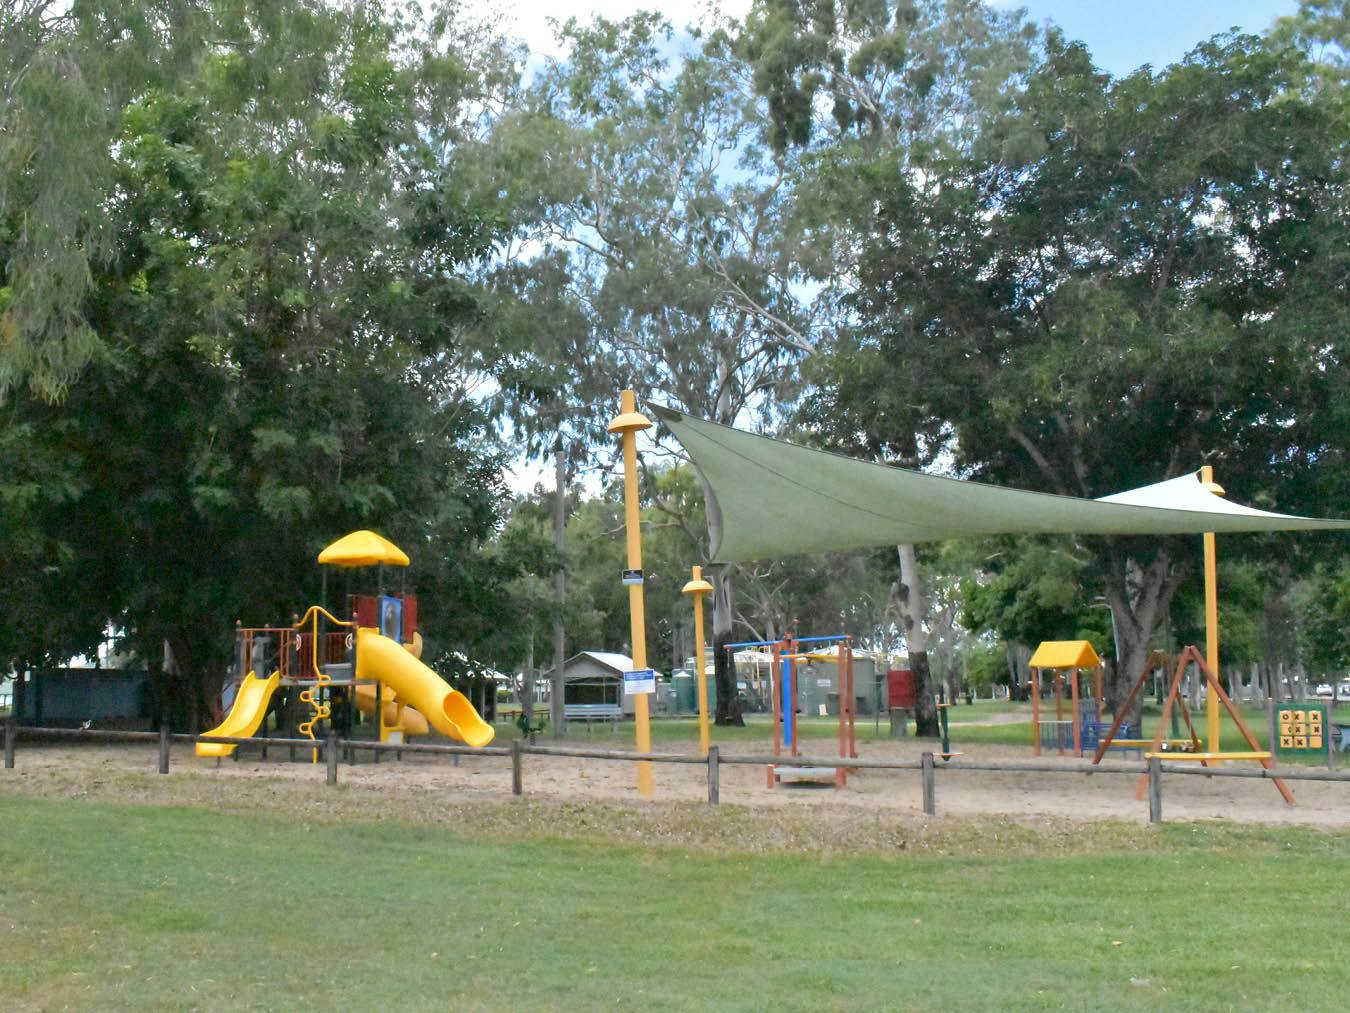 This view is looking east into the camping grounds from the existing playground facilities. This playground is contained within the camping ground.  